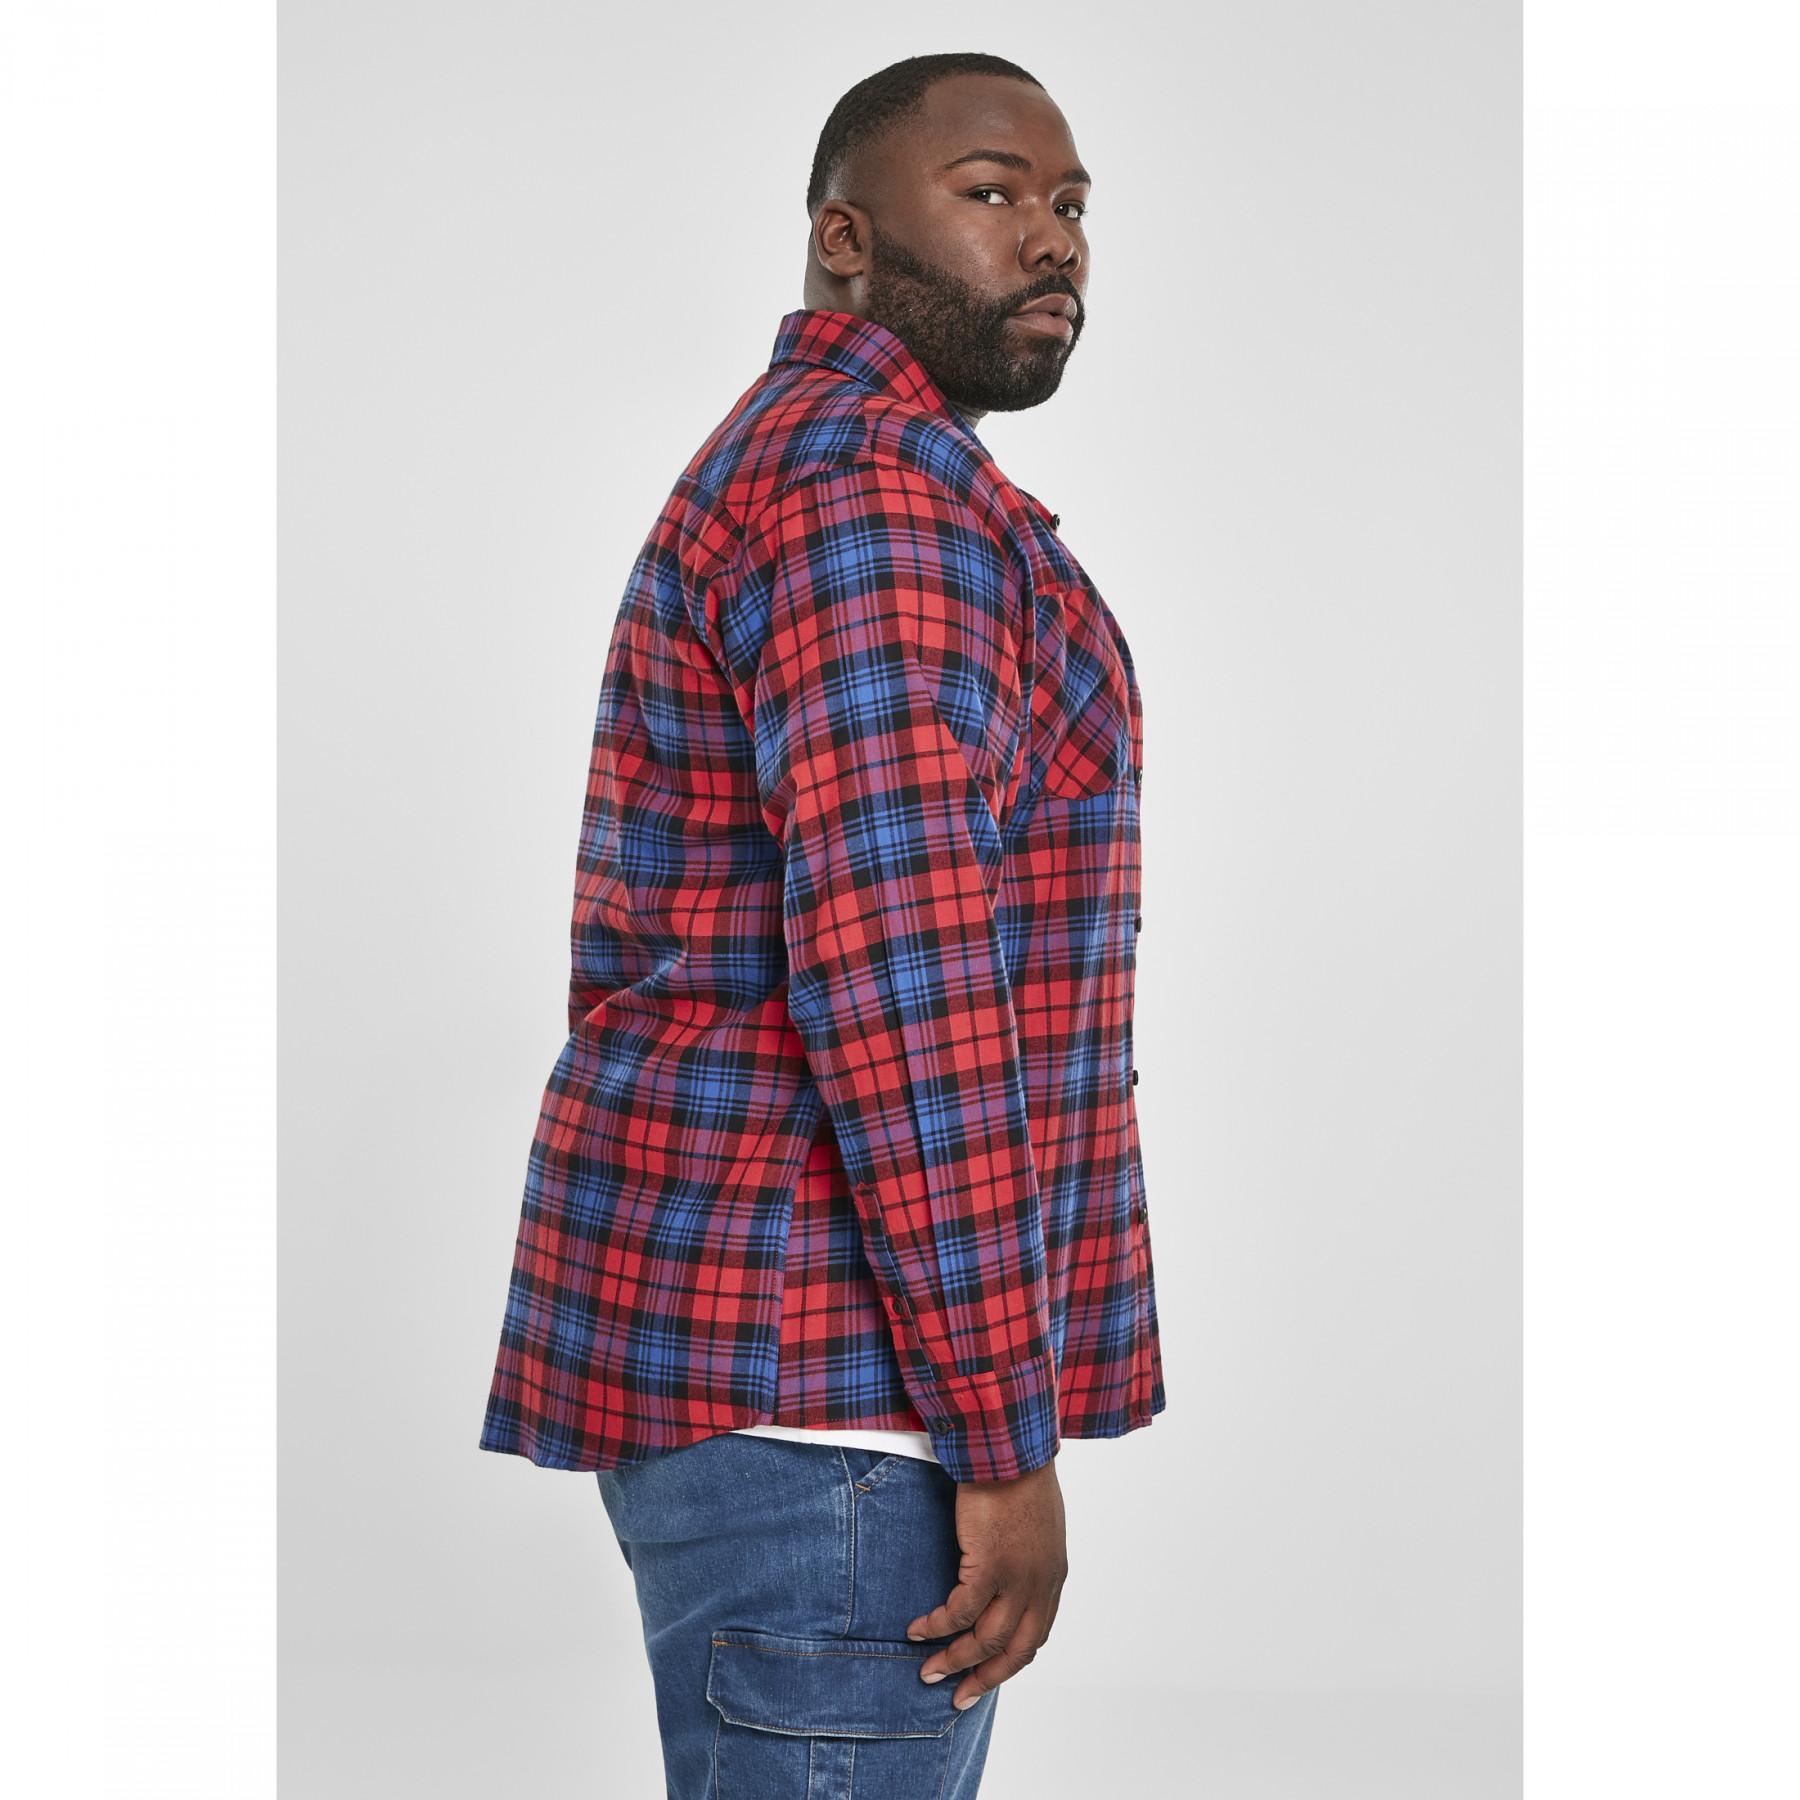 Chemise Urban Classic flanell 5